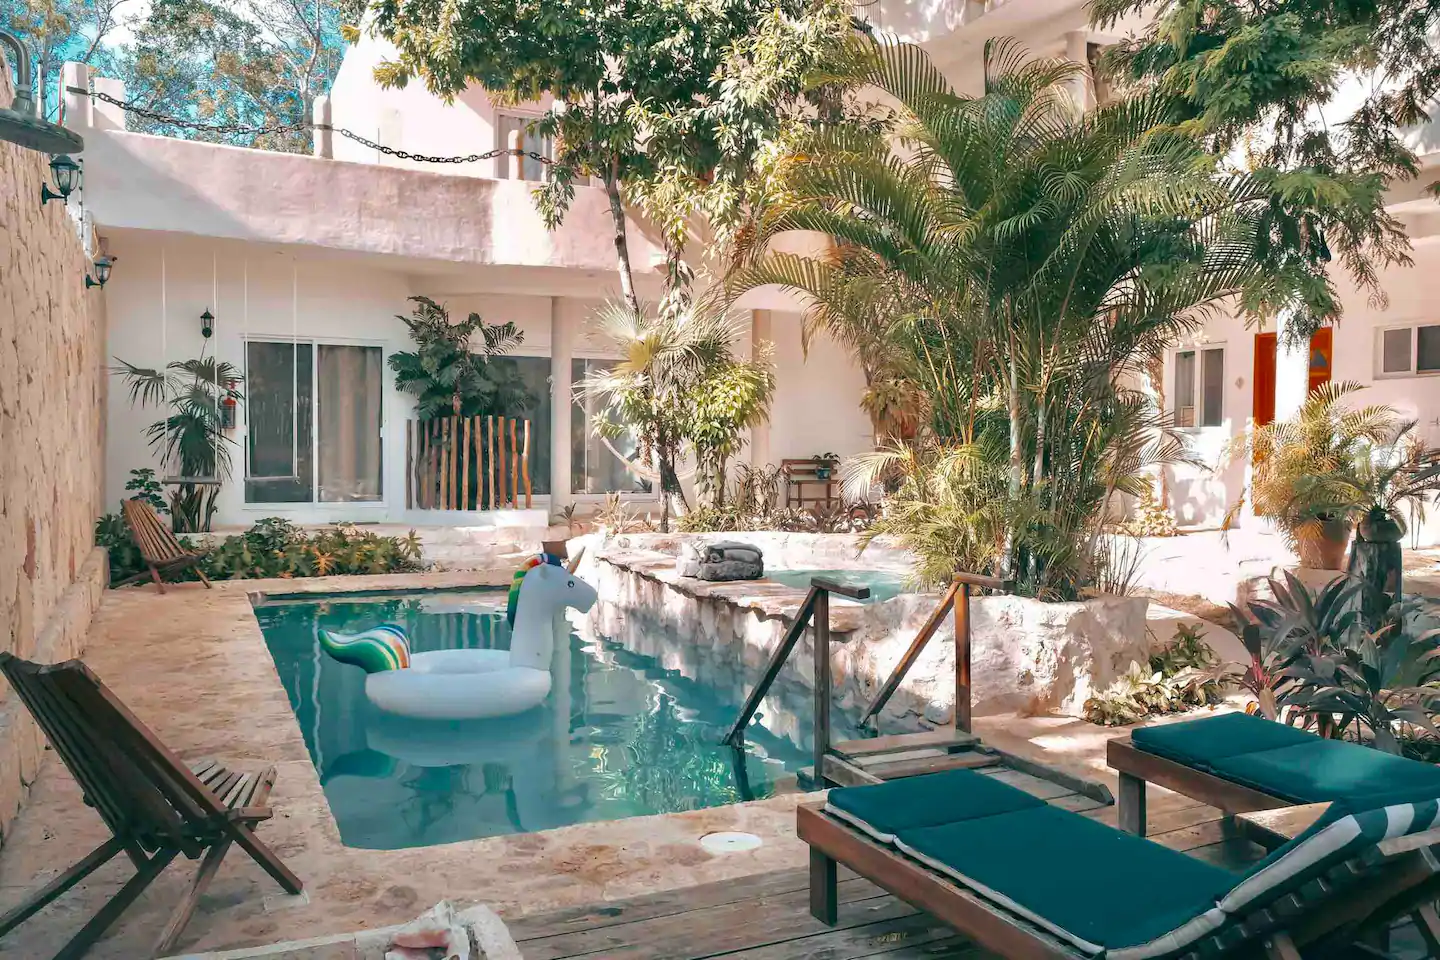 Stay at the Casita Maya Loft to enjoy one of the best Airbnbs in Tulum!